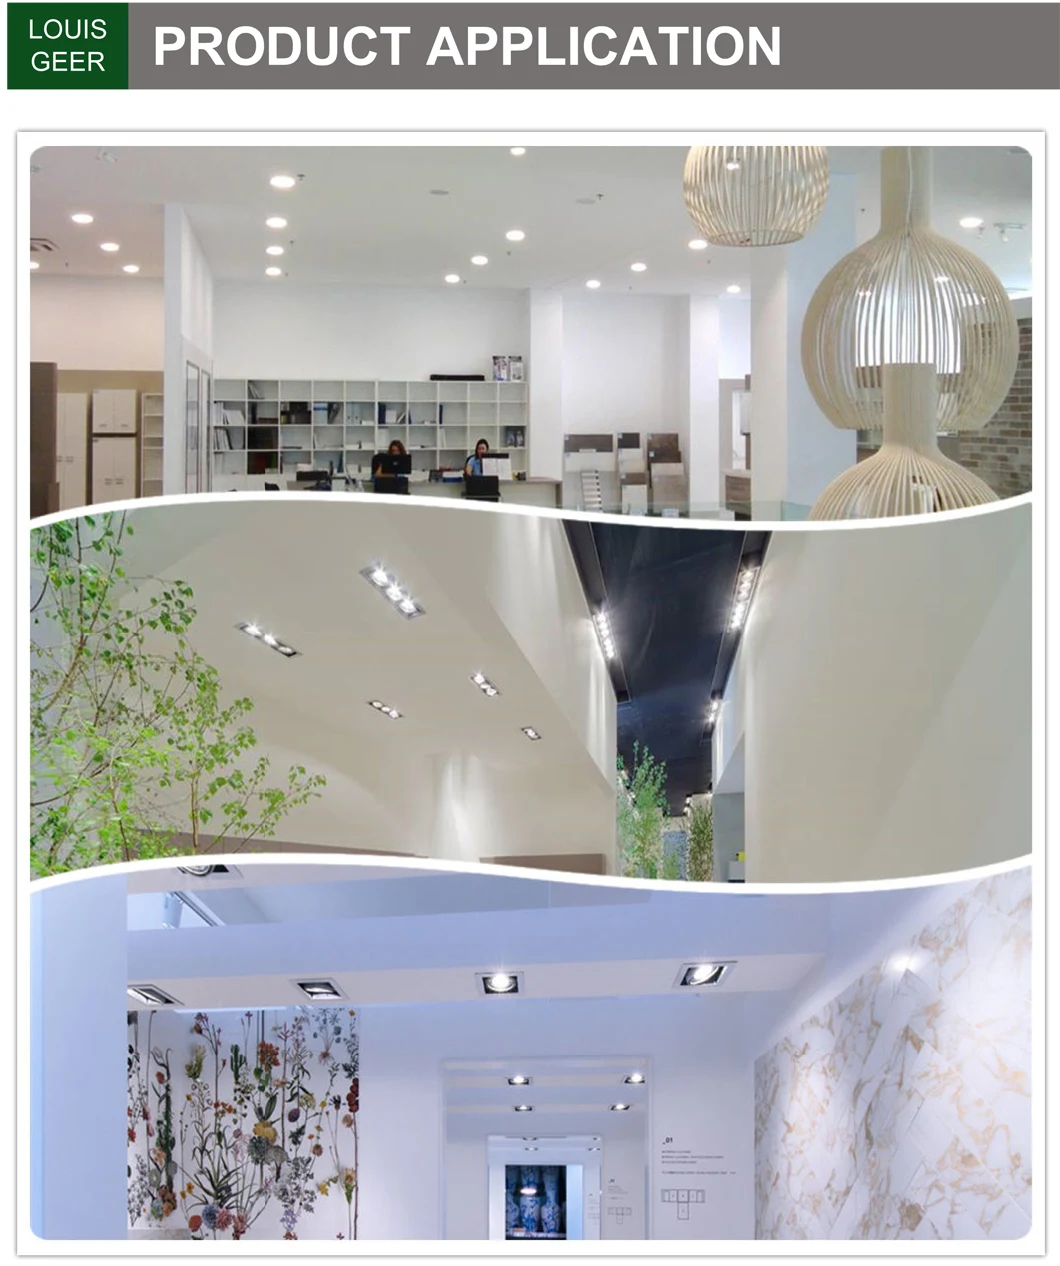 20W COB Dimmable LED Focus Lights Spot Lights for Showroom Gallery Museum